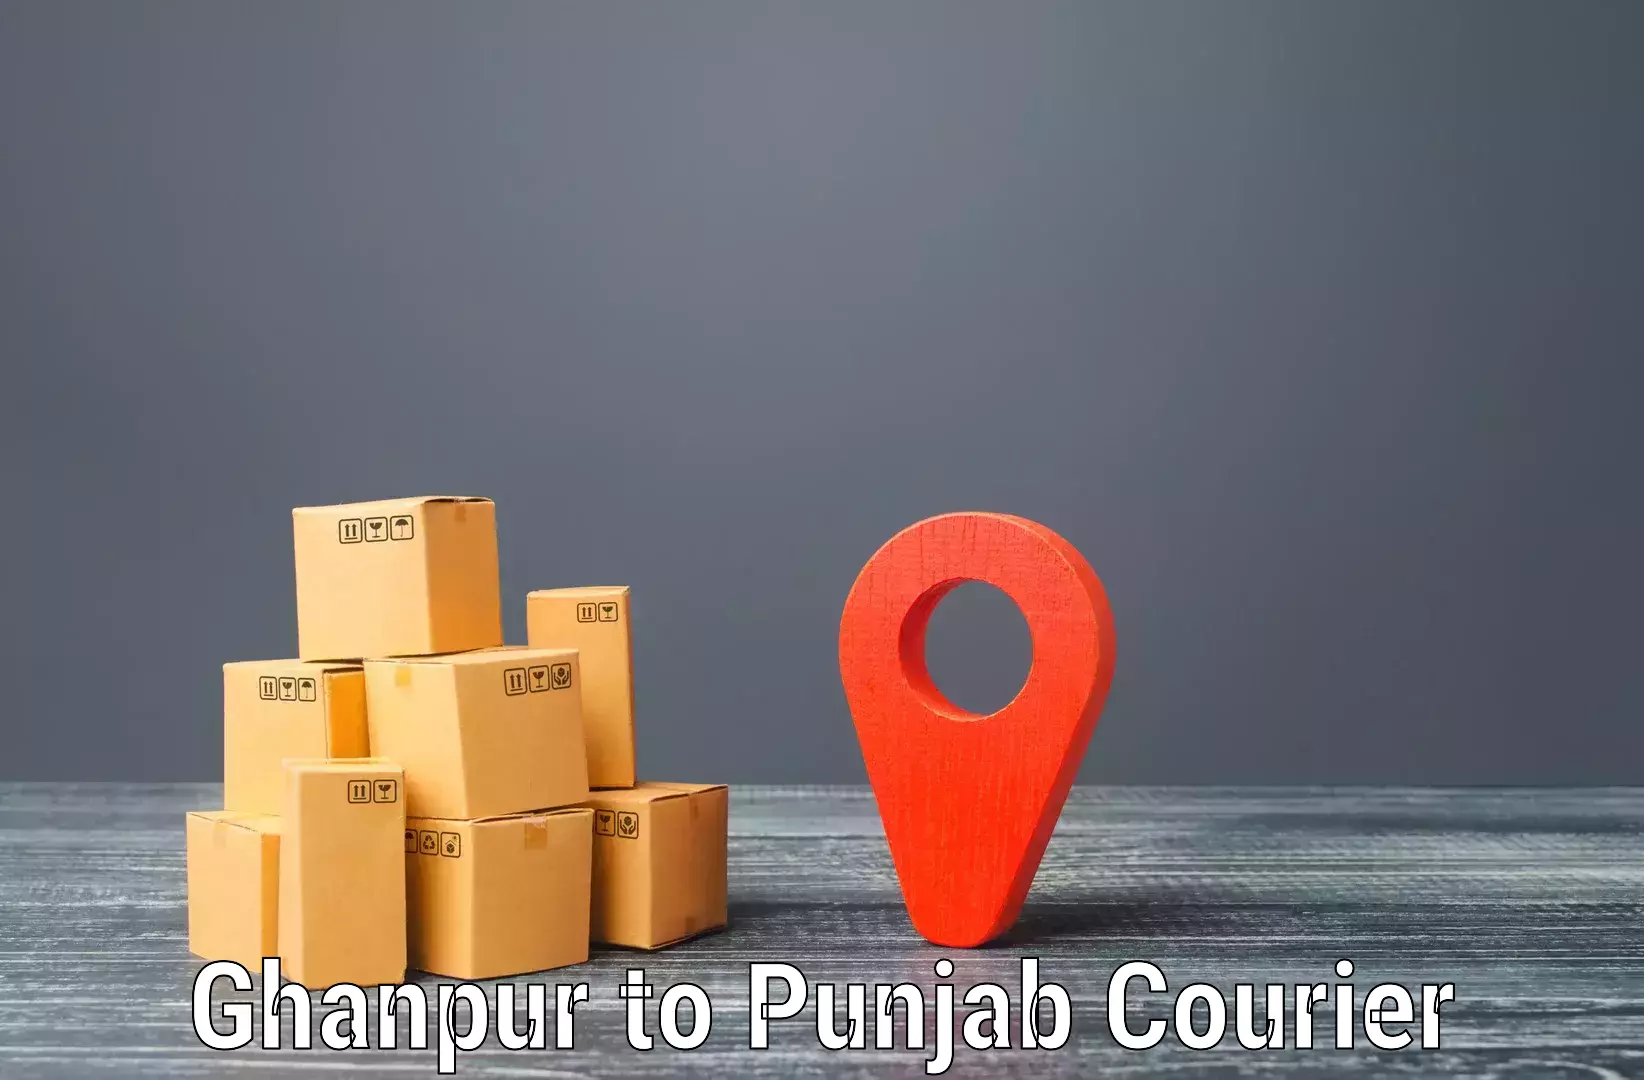 Postal and courier services Ghanpur to Anandpur Sahib